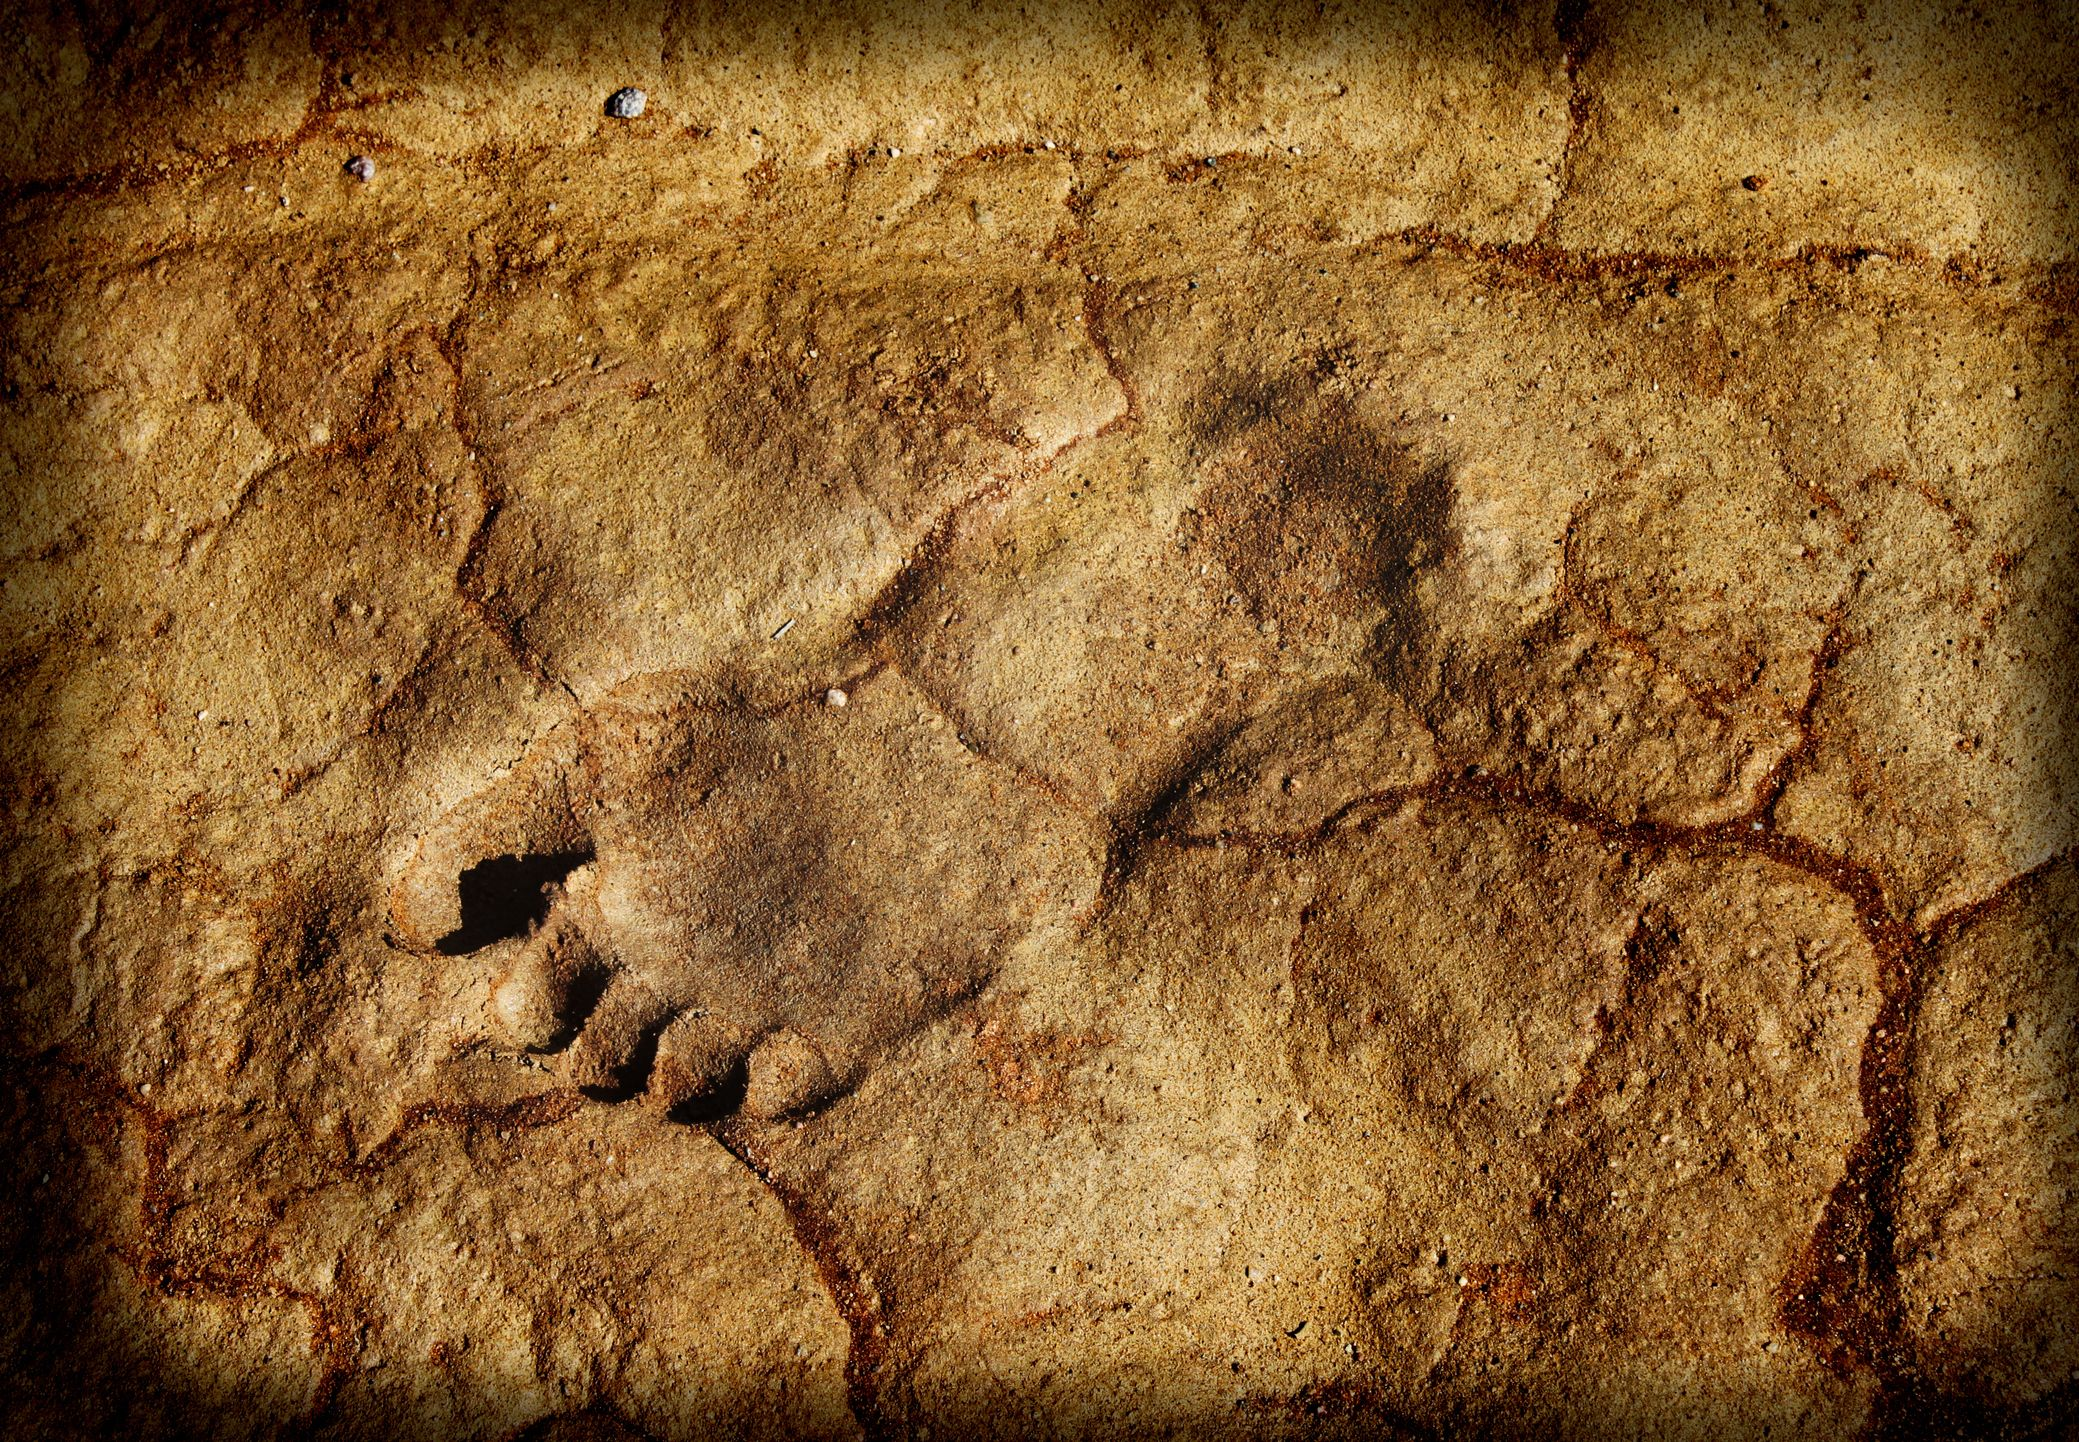 human footprints were discovered